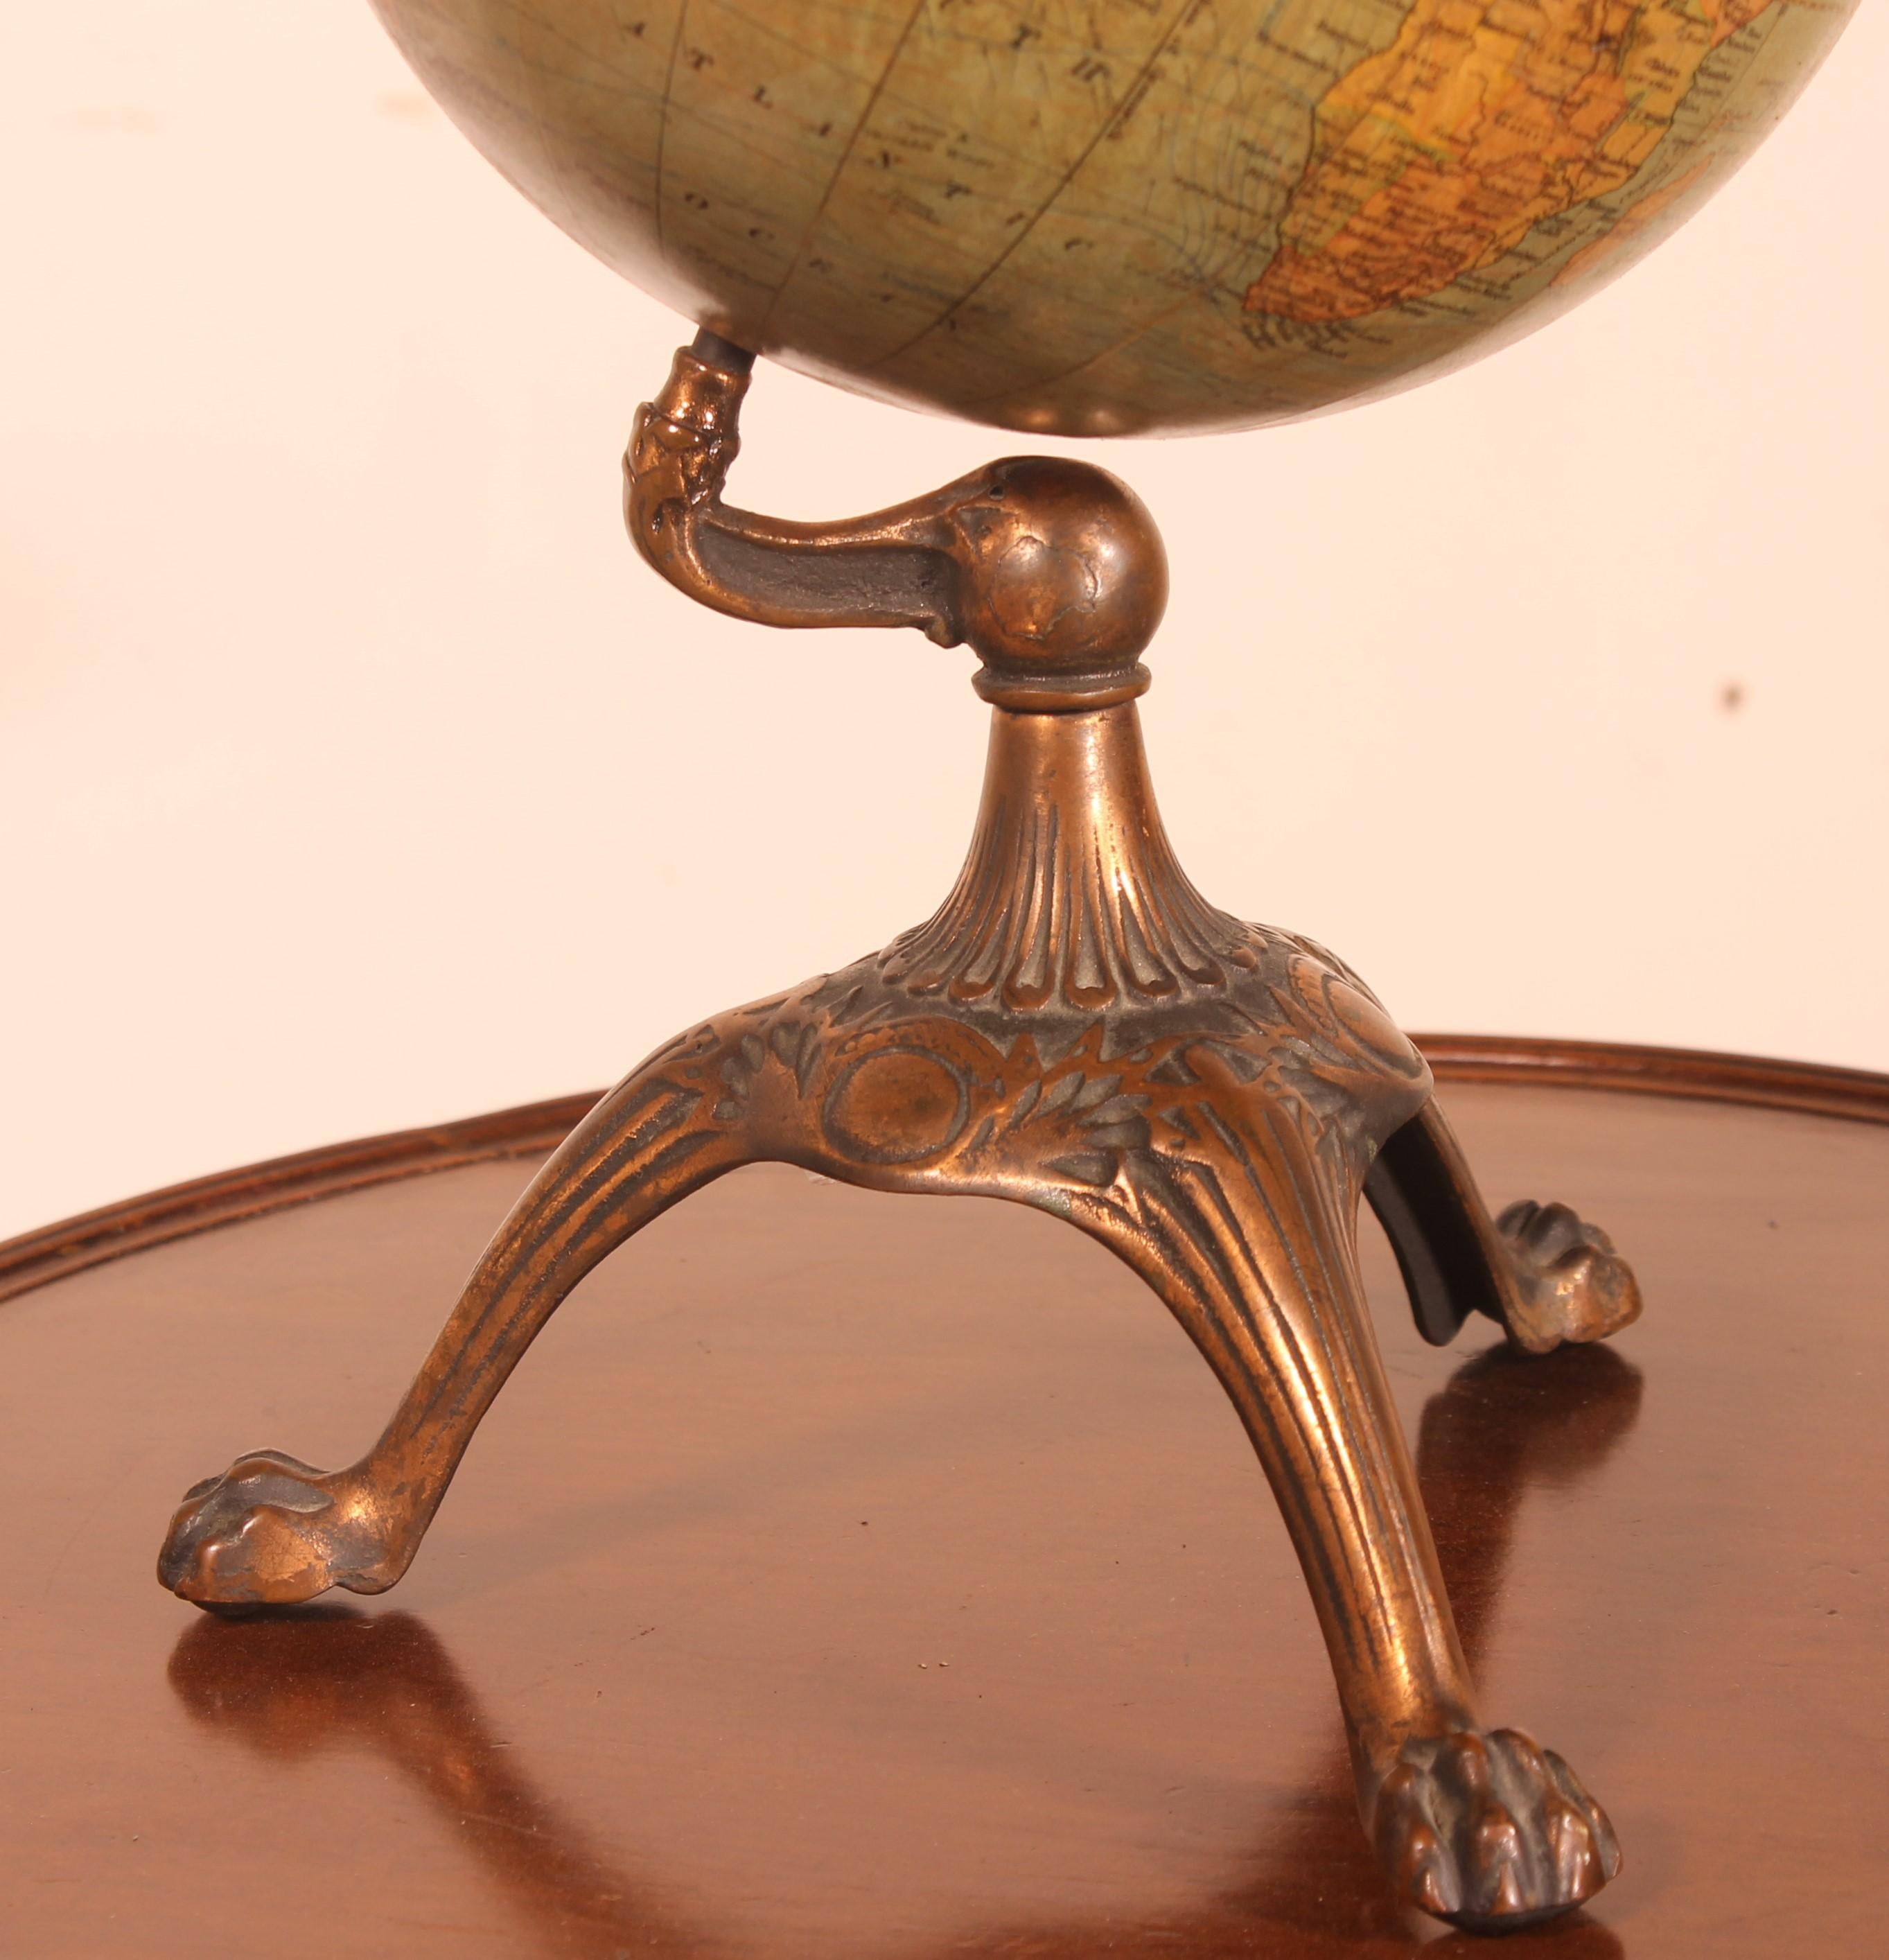 Elegant terrestrial globe Weber Costello Co Chicago heights from the end of the 19th century
Very elegant small size globe which is unusual and very interesting in a decoration on a desk for example
Elegant tripod foot in cast iron
Very beautiful